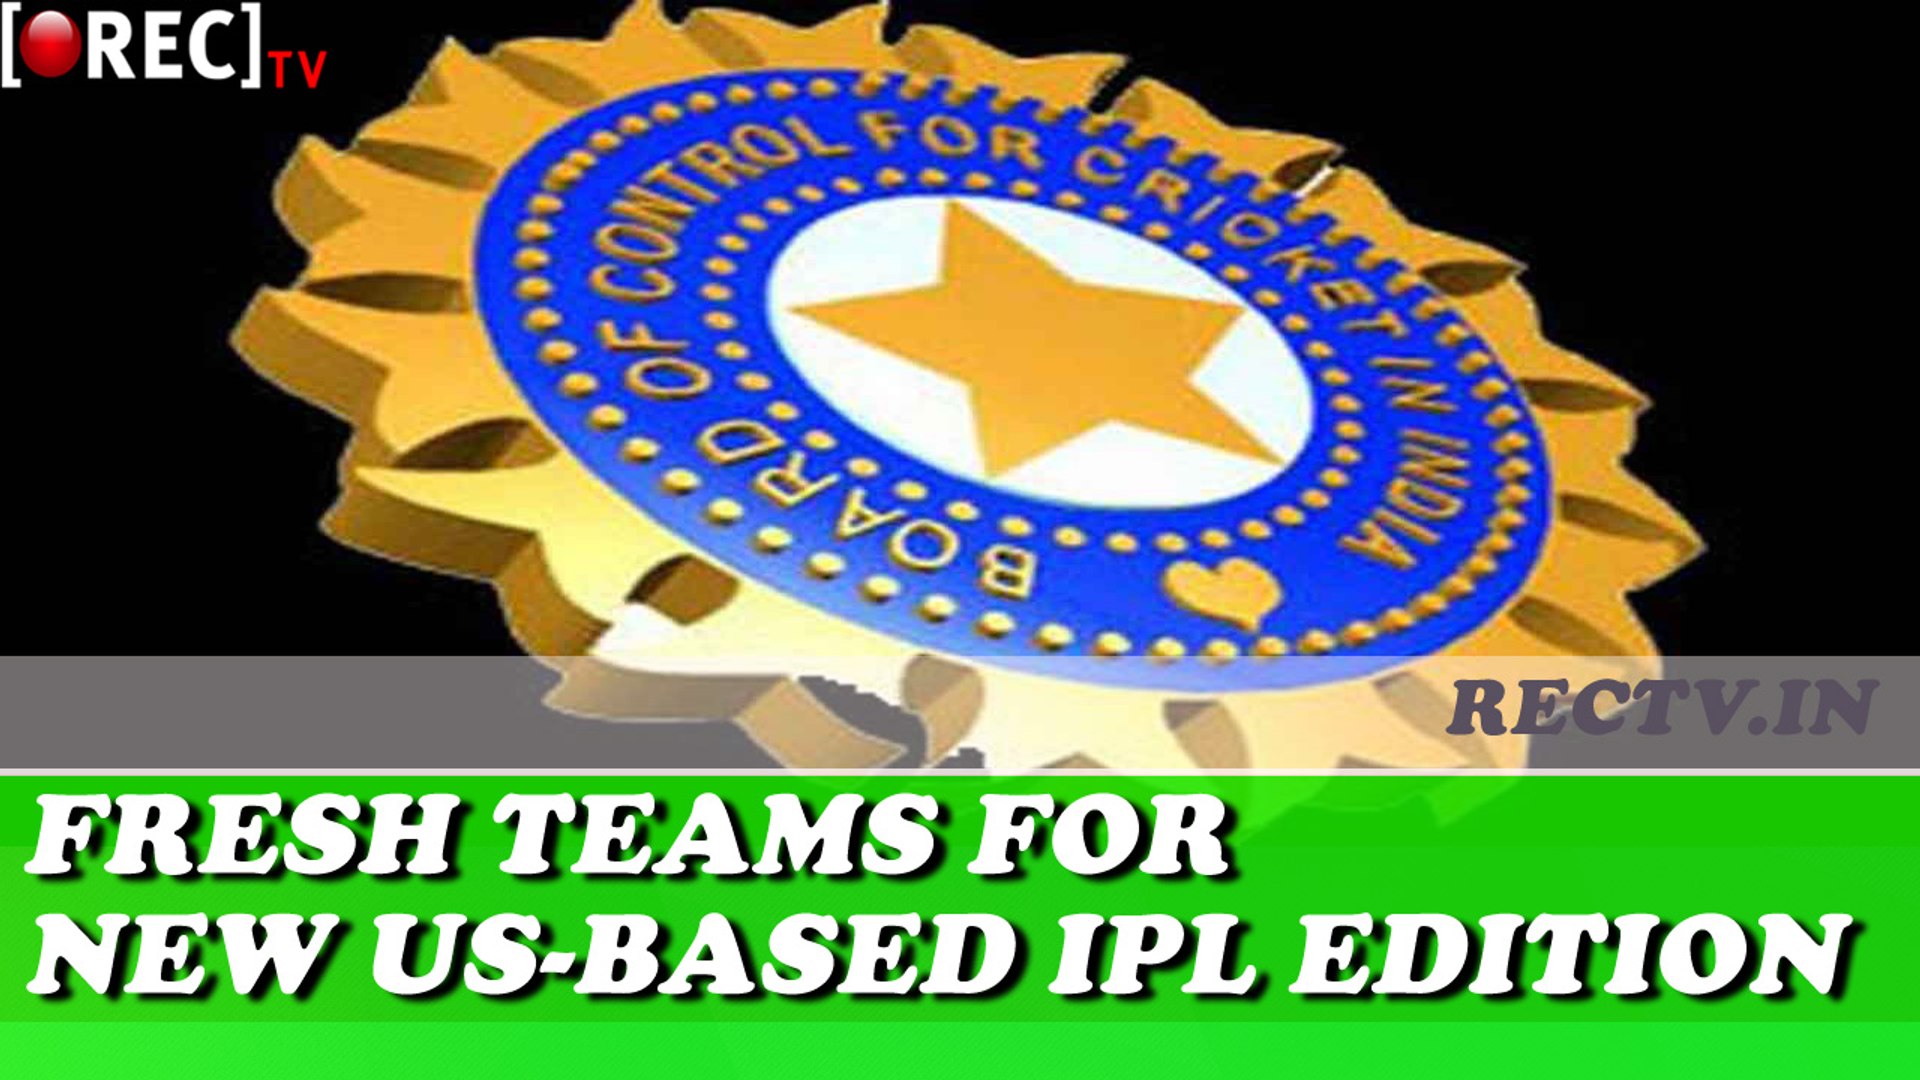 Fresh teams for new US based IPL edition  ll latest sports news updates